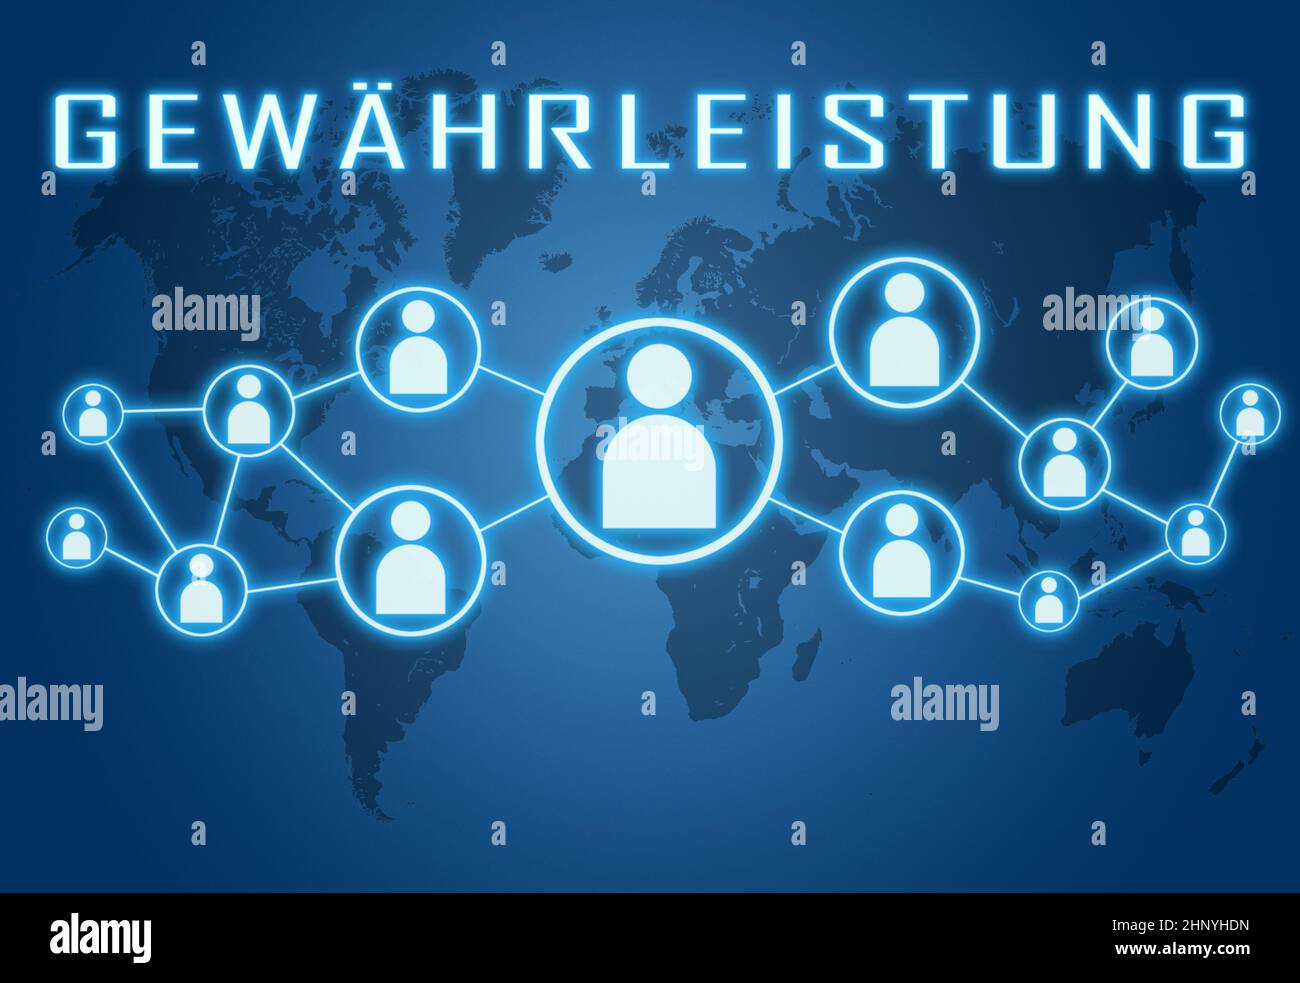 Gewaehrleistung - german word for warranty or guarantee - text concept on blue background with world map and social icons. Stock Photo